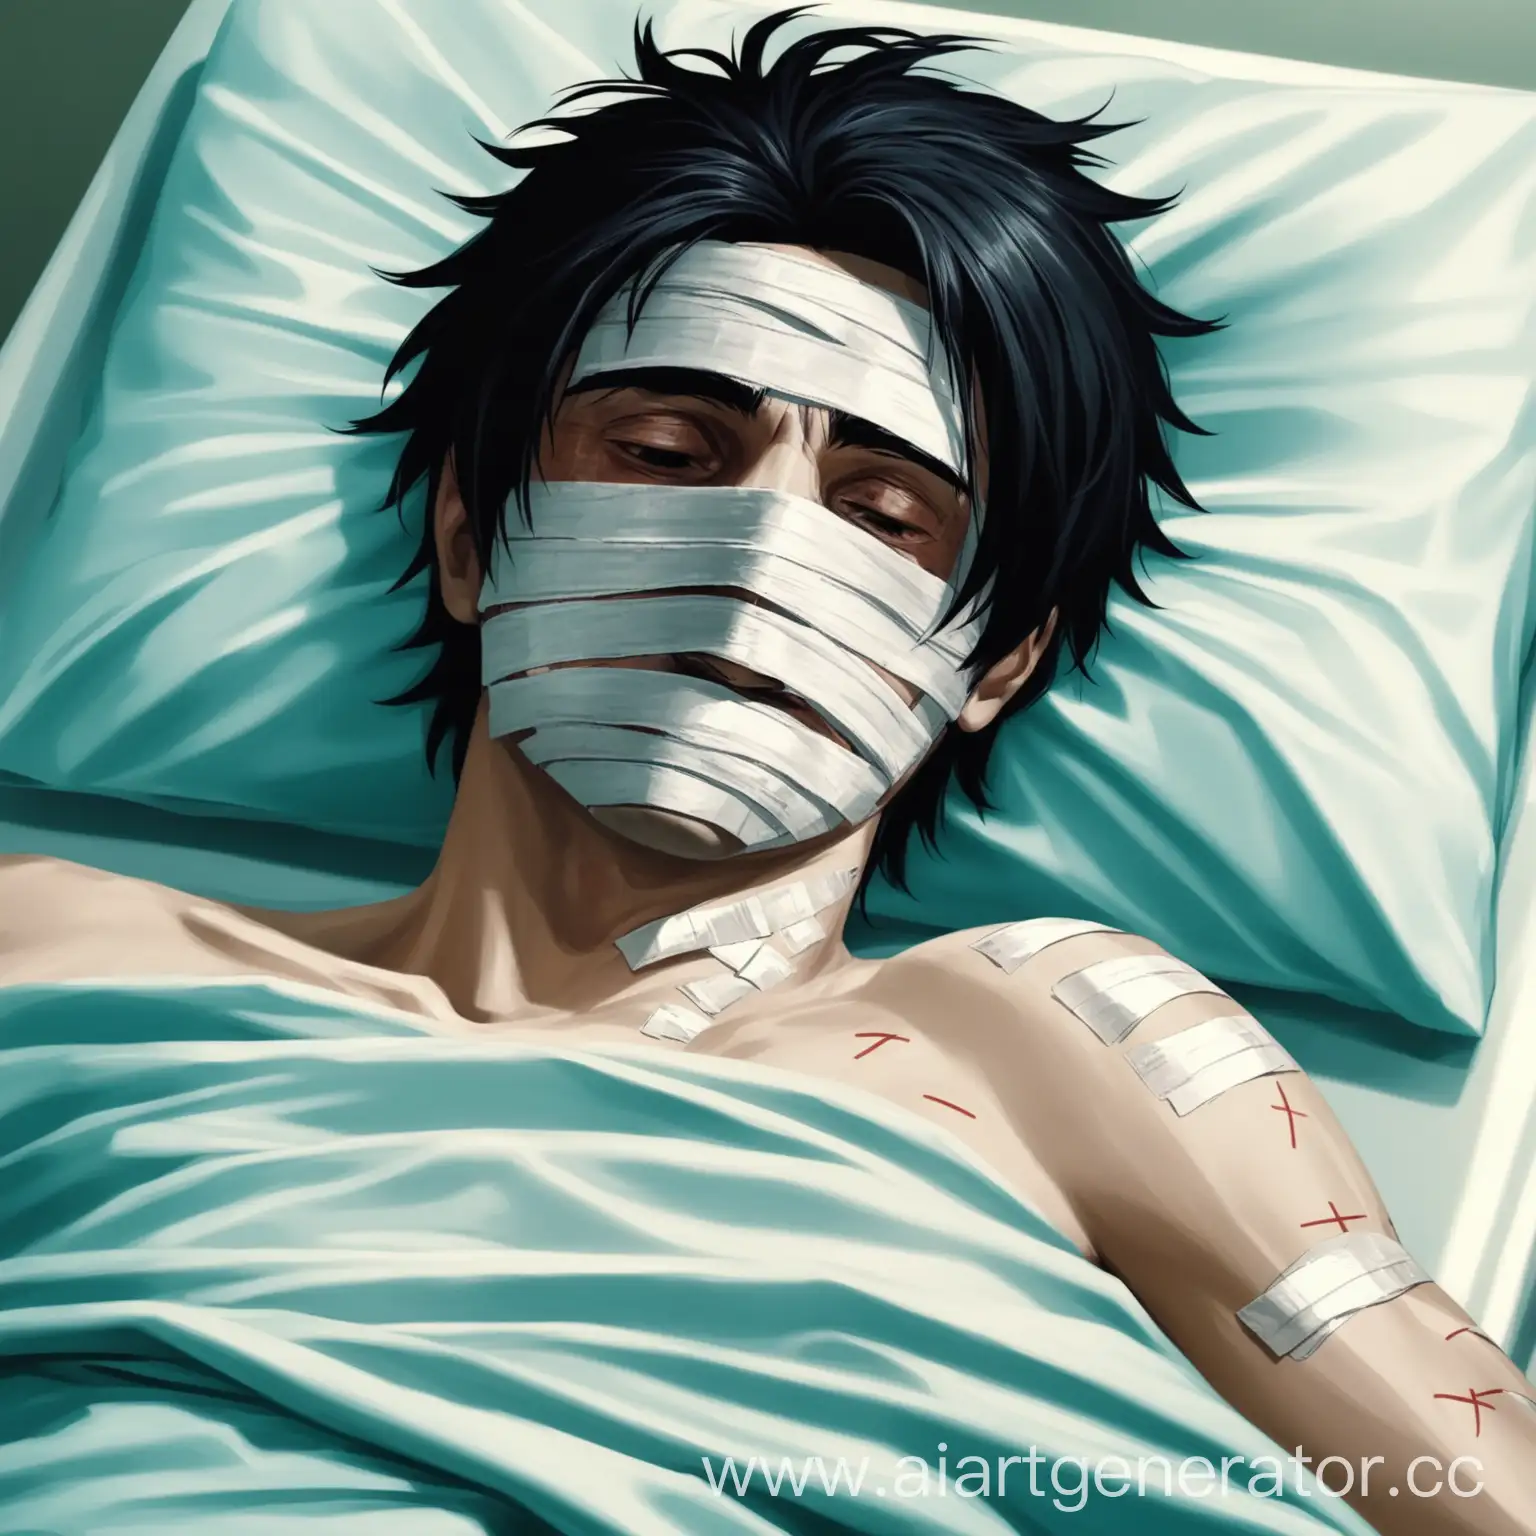 Man-with-Bandaged-Face-Lying-in-Hospital-Bed